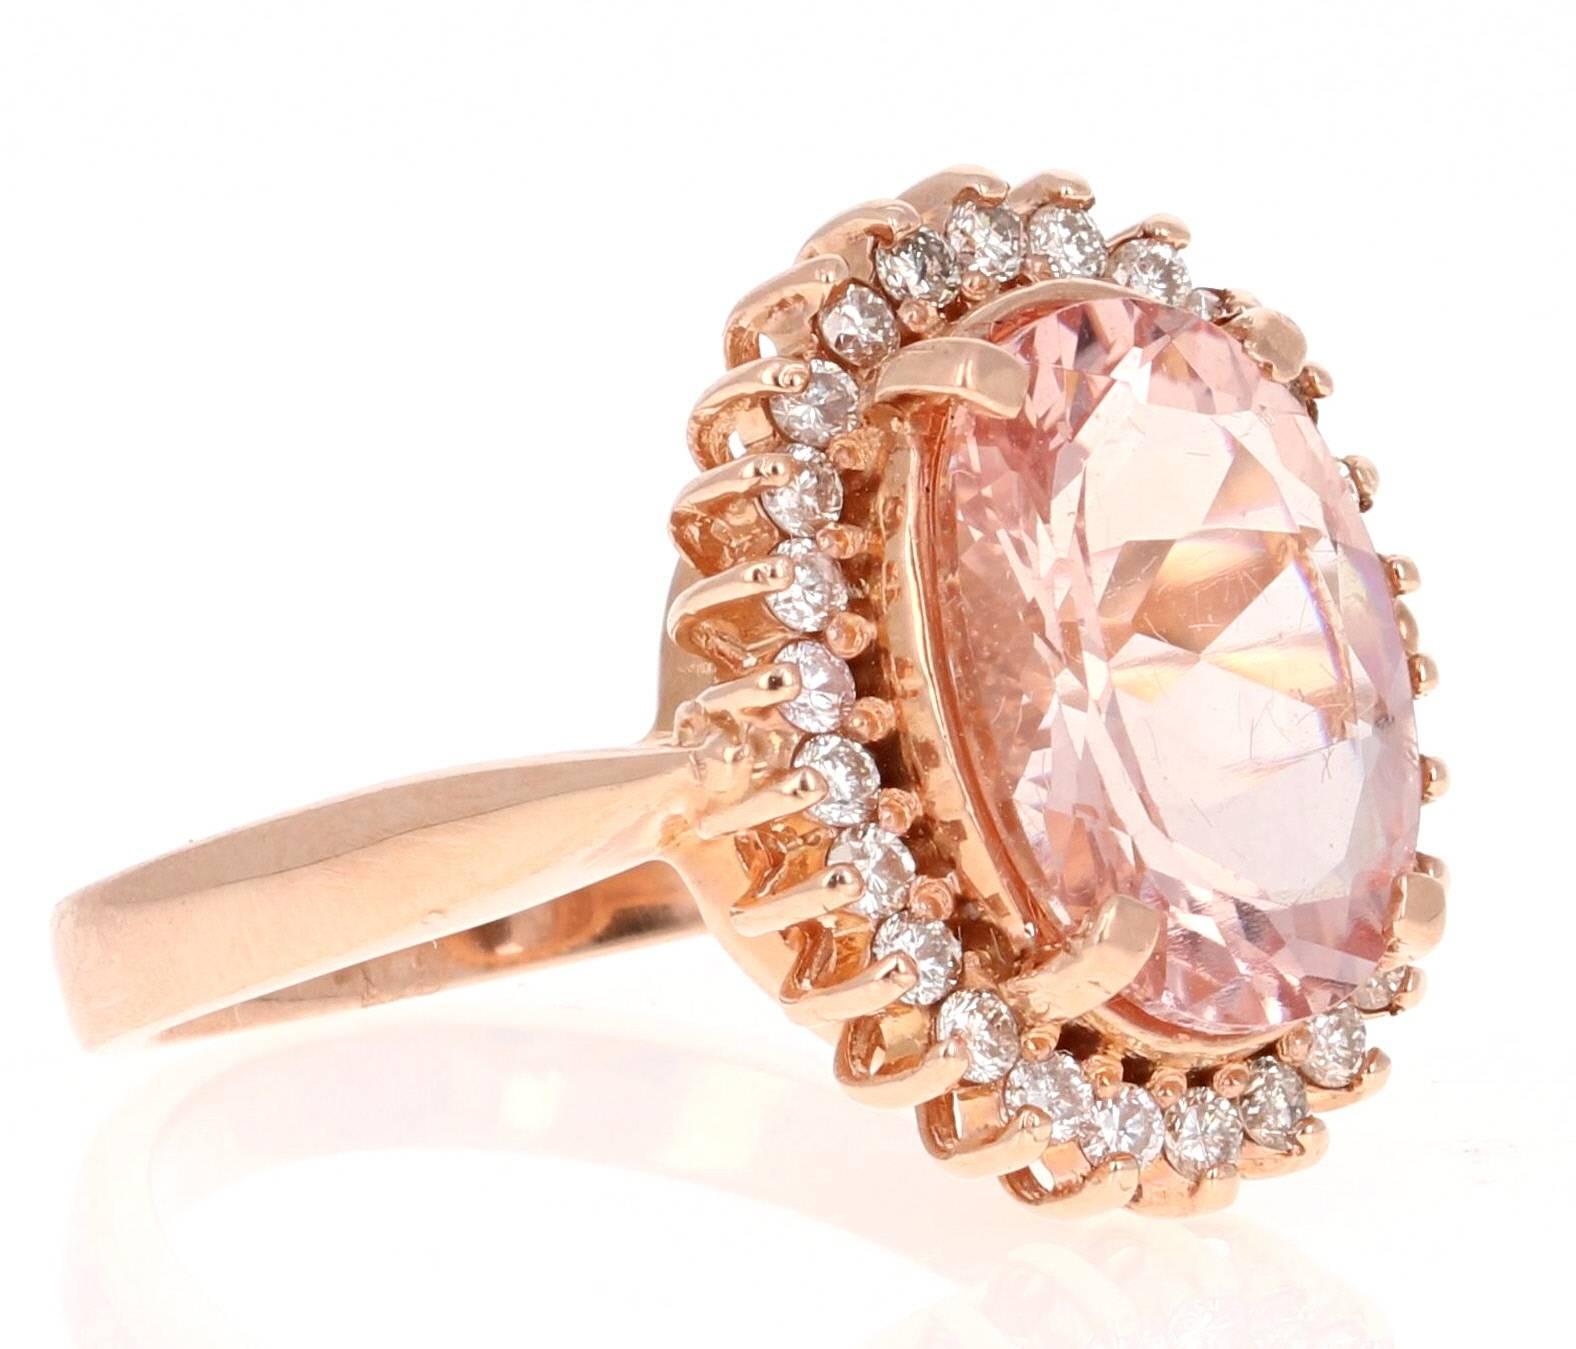 This classic Morganite Ring has an Oval Cut 3.93 Carat Morganite as its center and is surrounded by 26 Round Cut Diamonds that weigh 0.49 Carats.  The total carat weight of the ring is 4.41 Carats. The Clarity and Color of the Diamonds are VS-H.